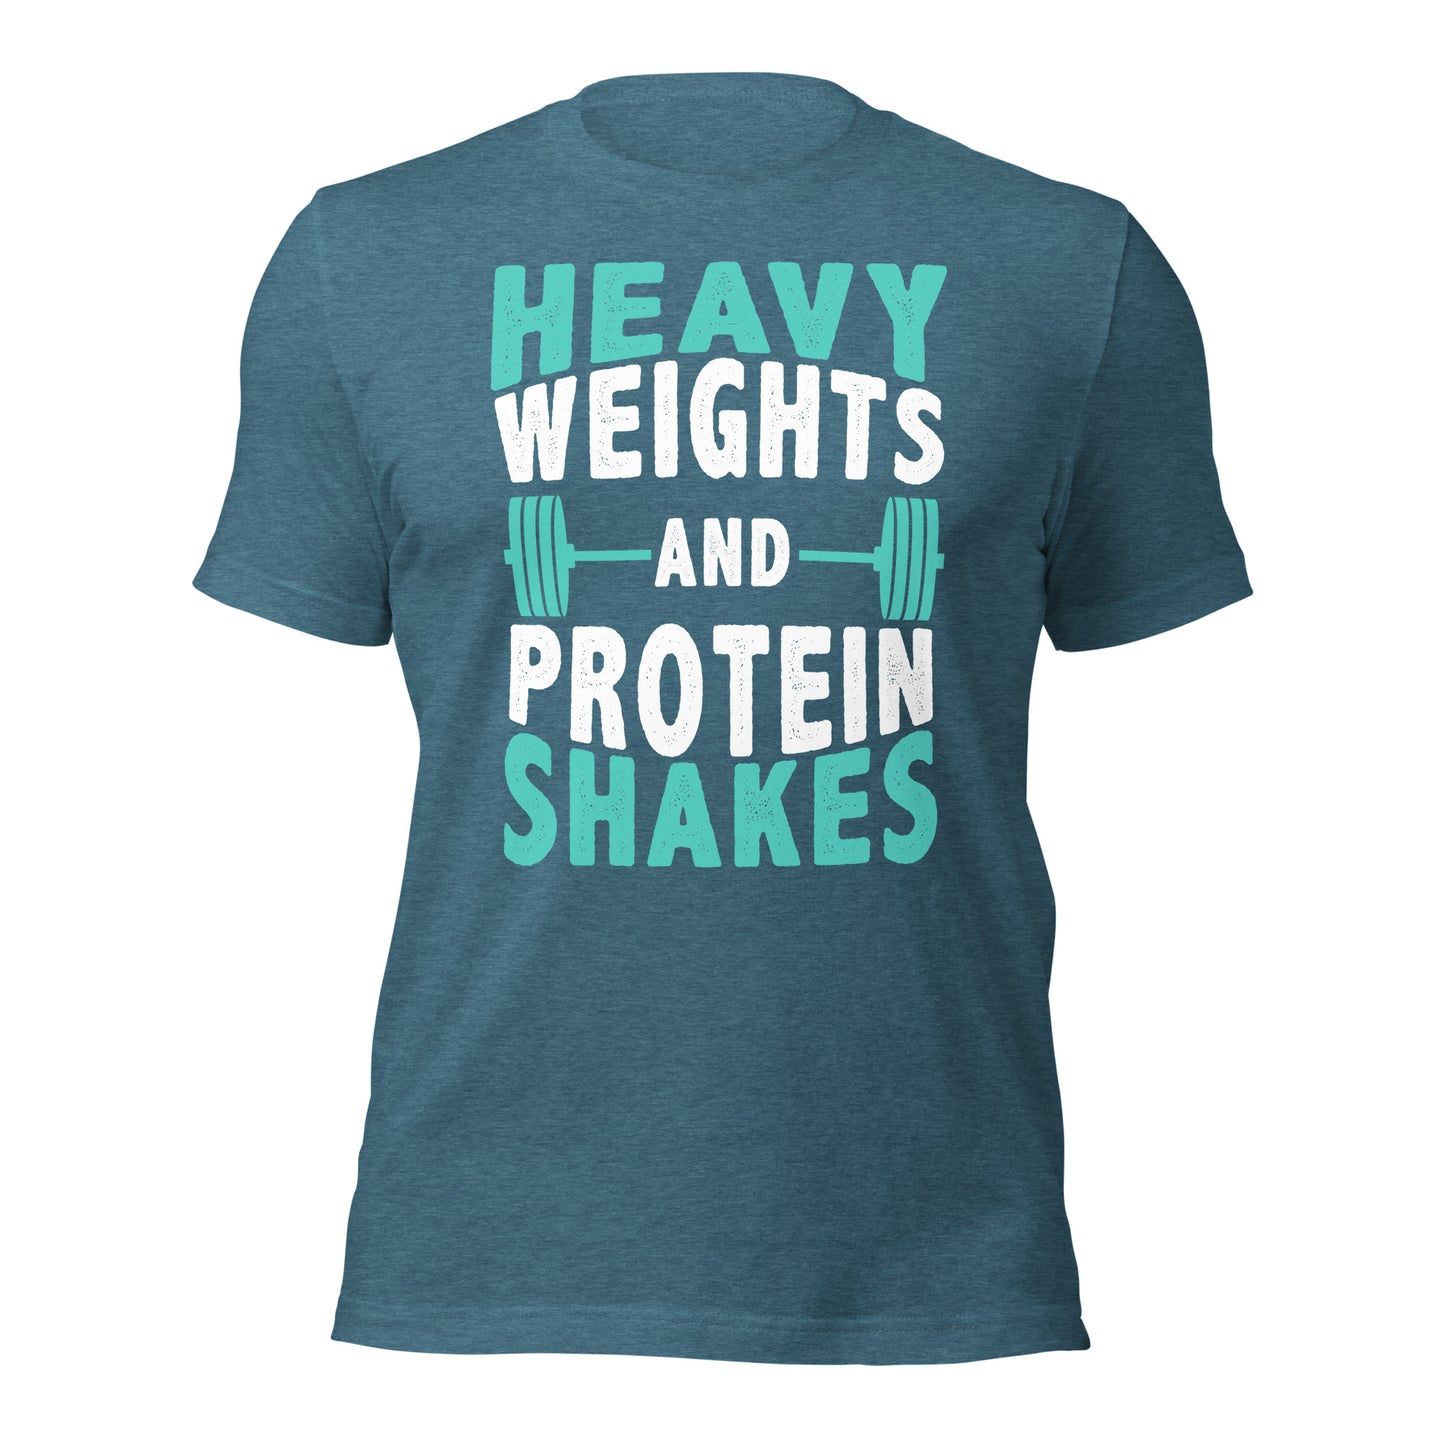 Heavy weights protein shakes tee teal